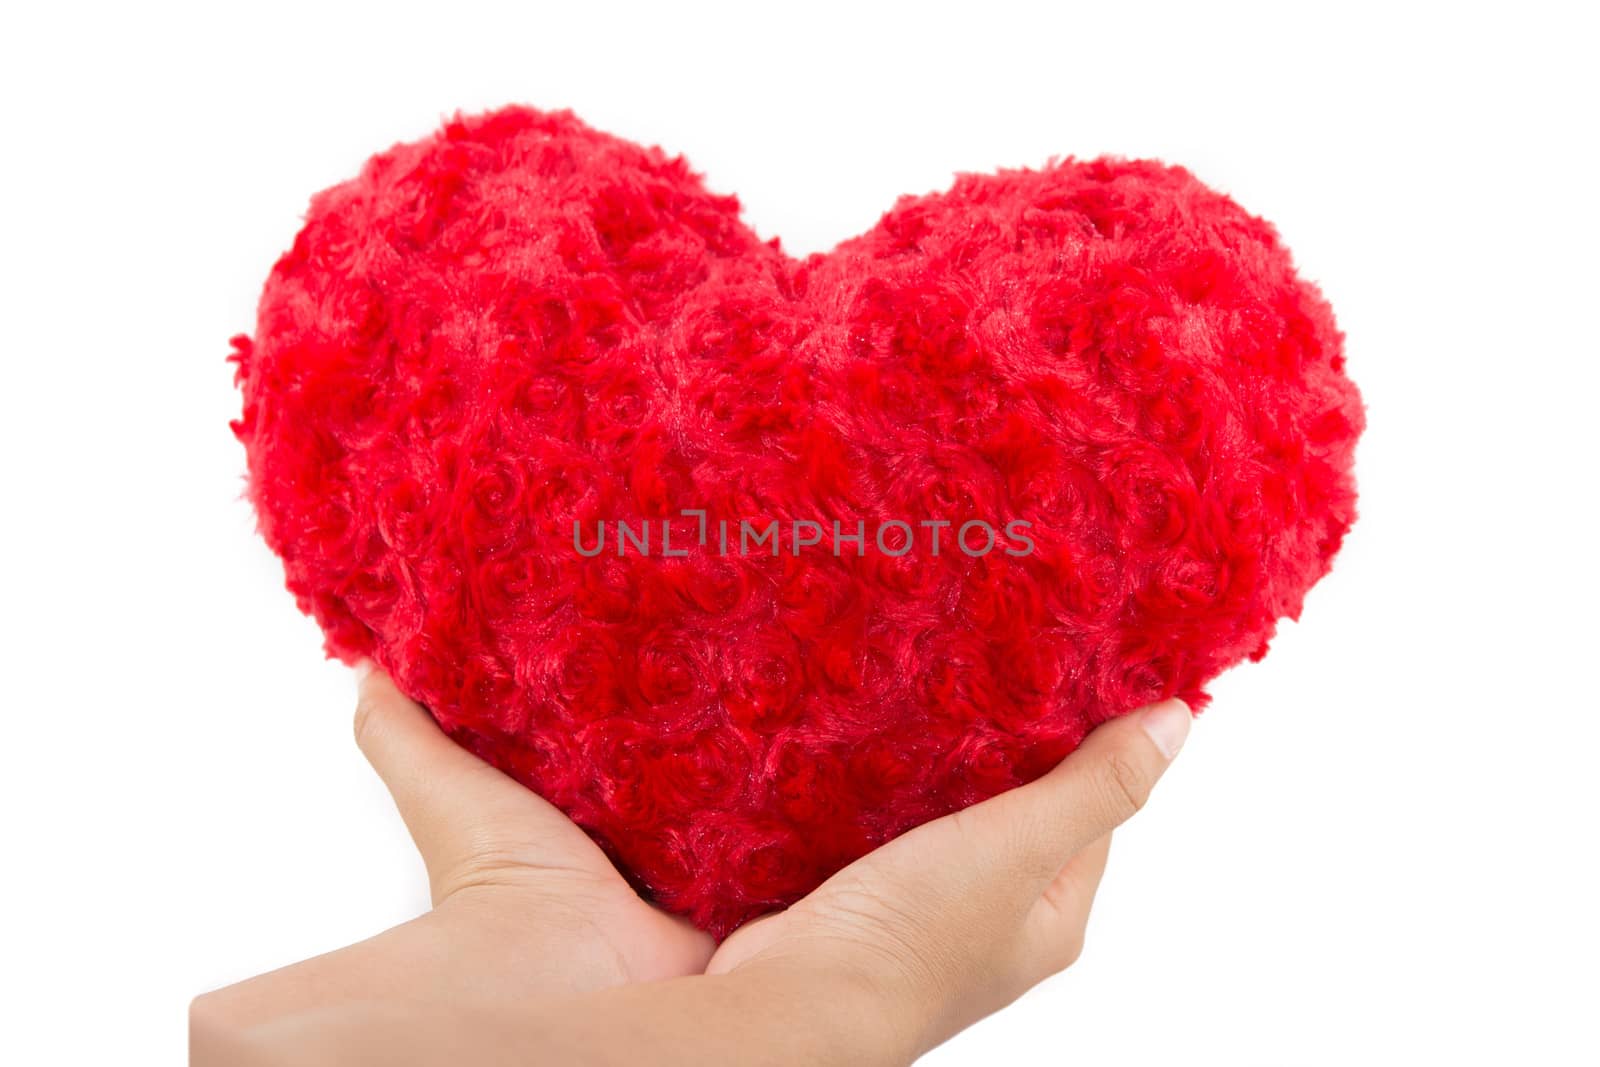 Red heart hold on hand isolated on white background